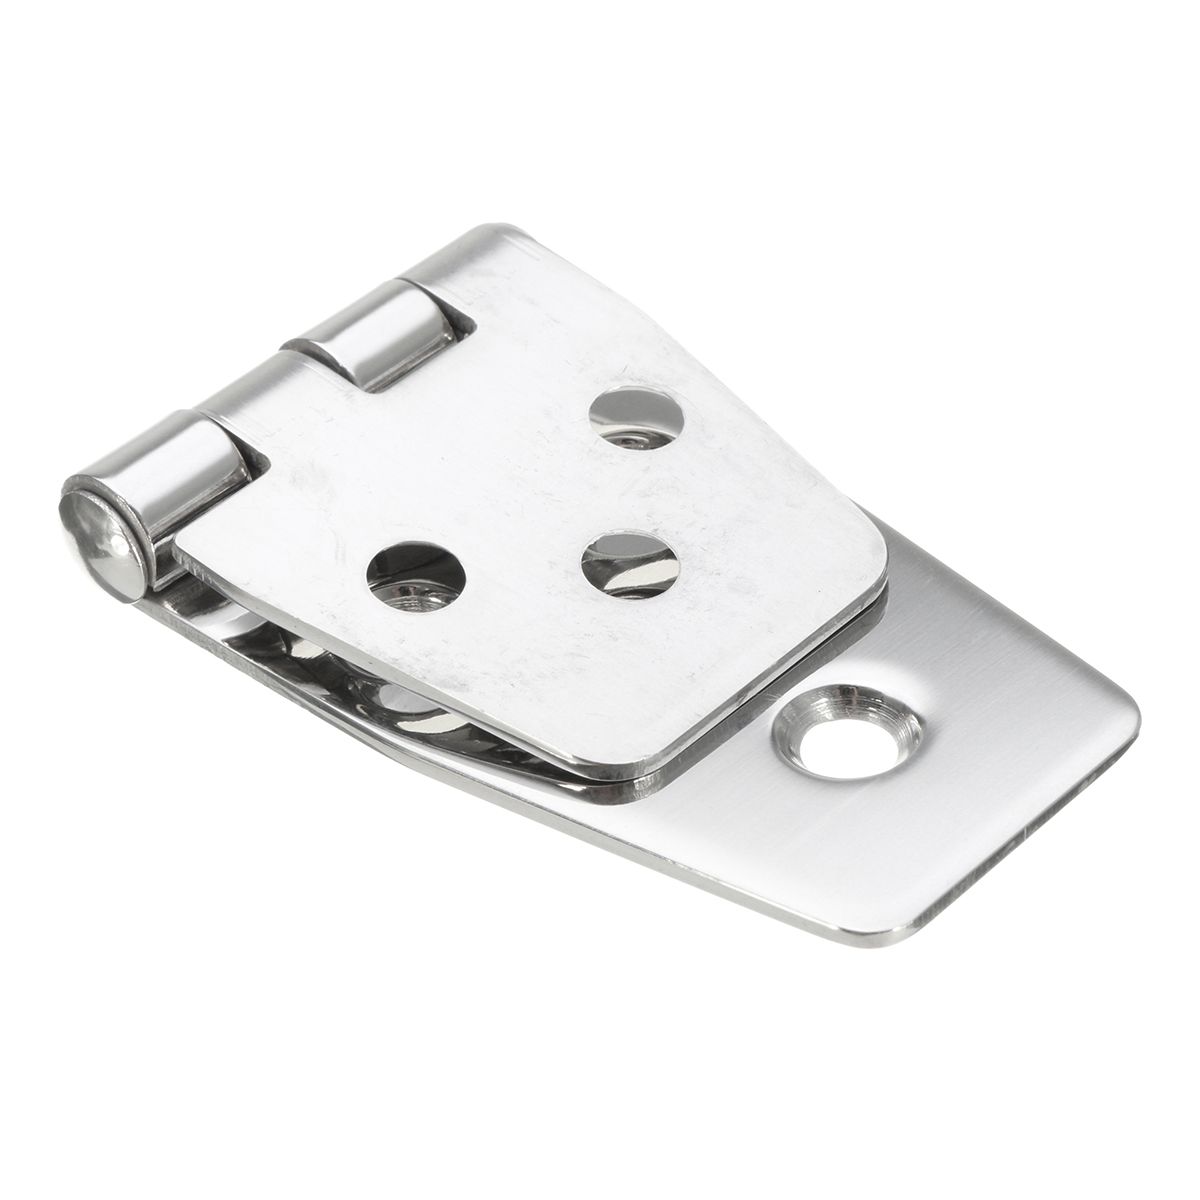 38x97mm-Flush-Hinges-316-Stainless-Steel-Polished-Silver-for-Boat-Marine-Door-1156665